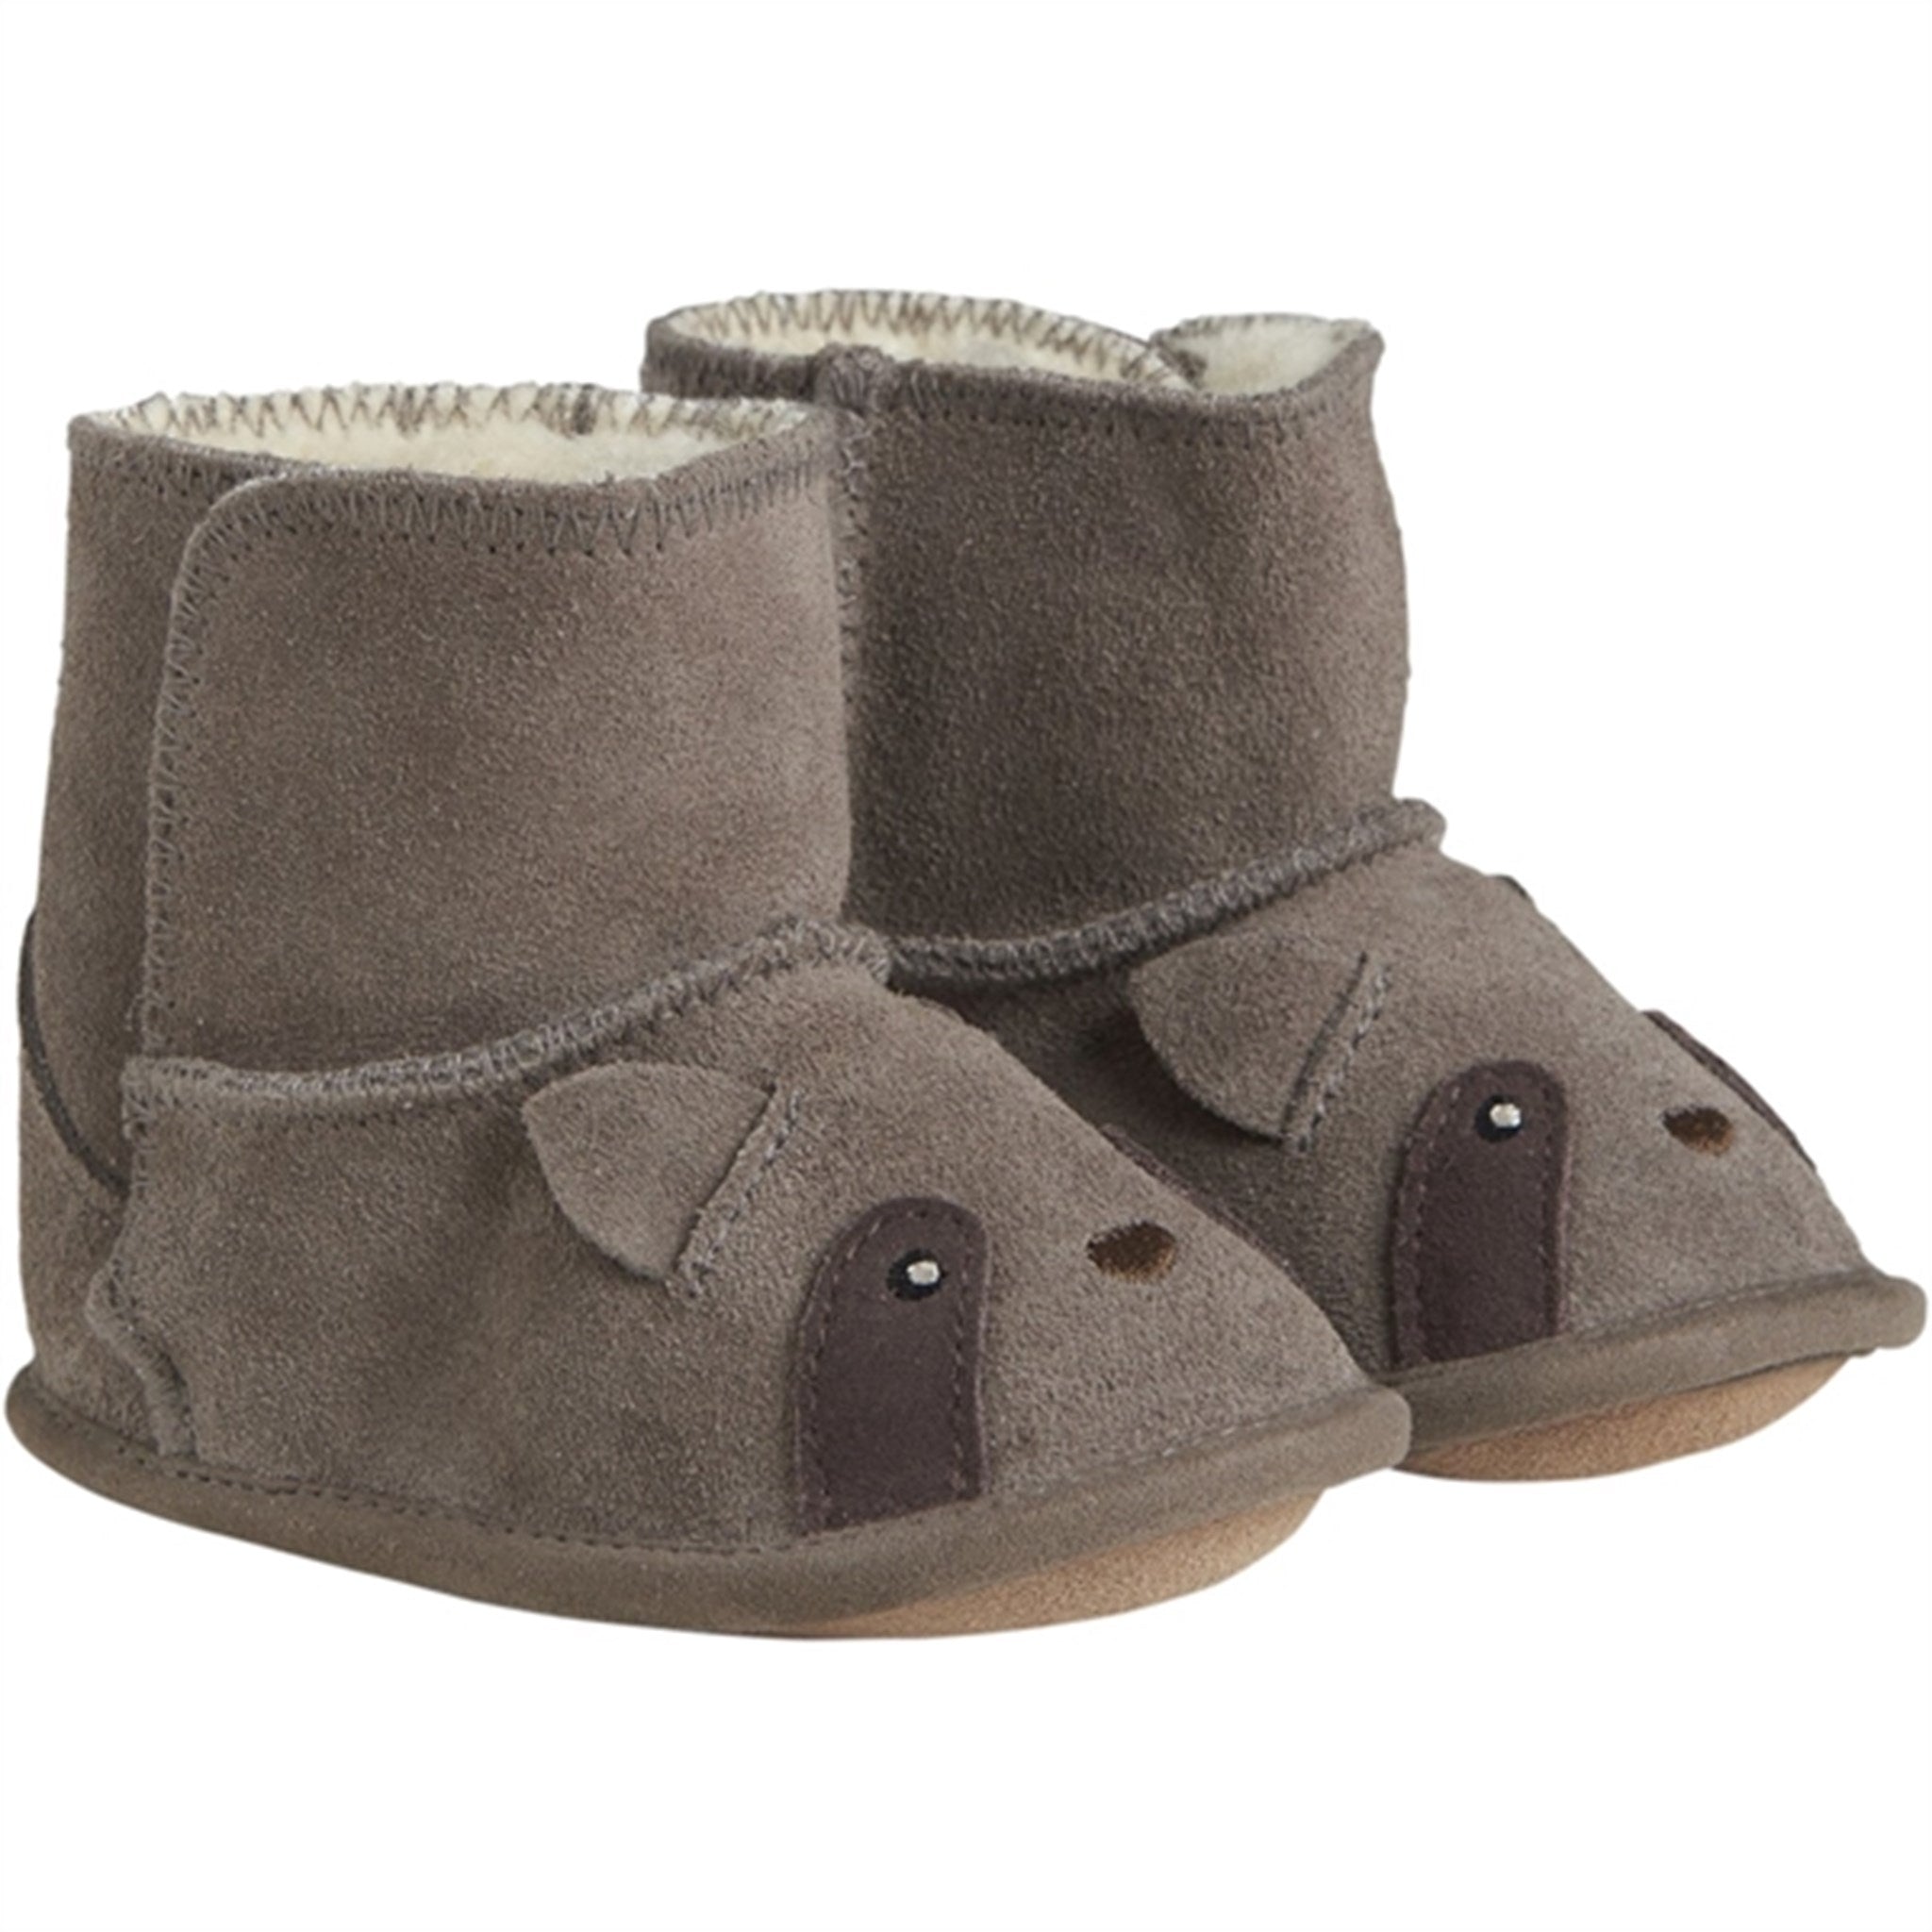 En Fant Teddy Boots Animal Chocolate Chip